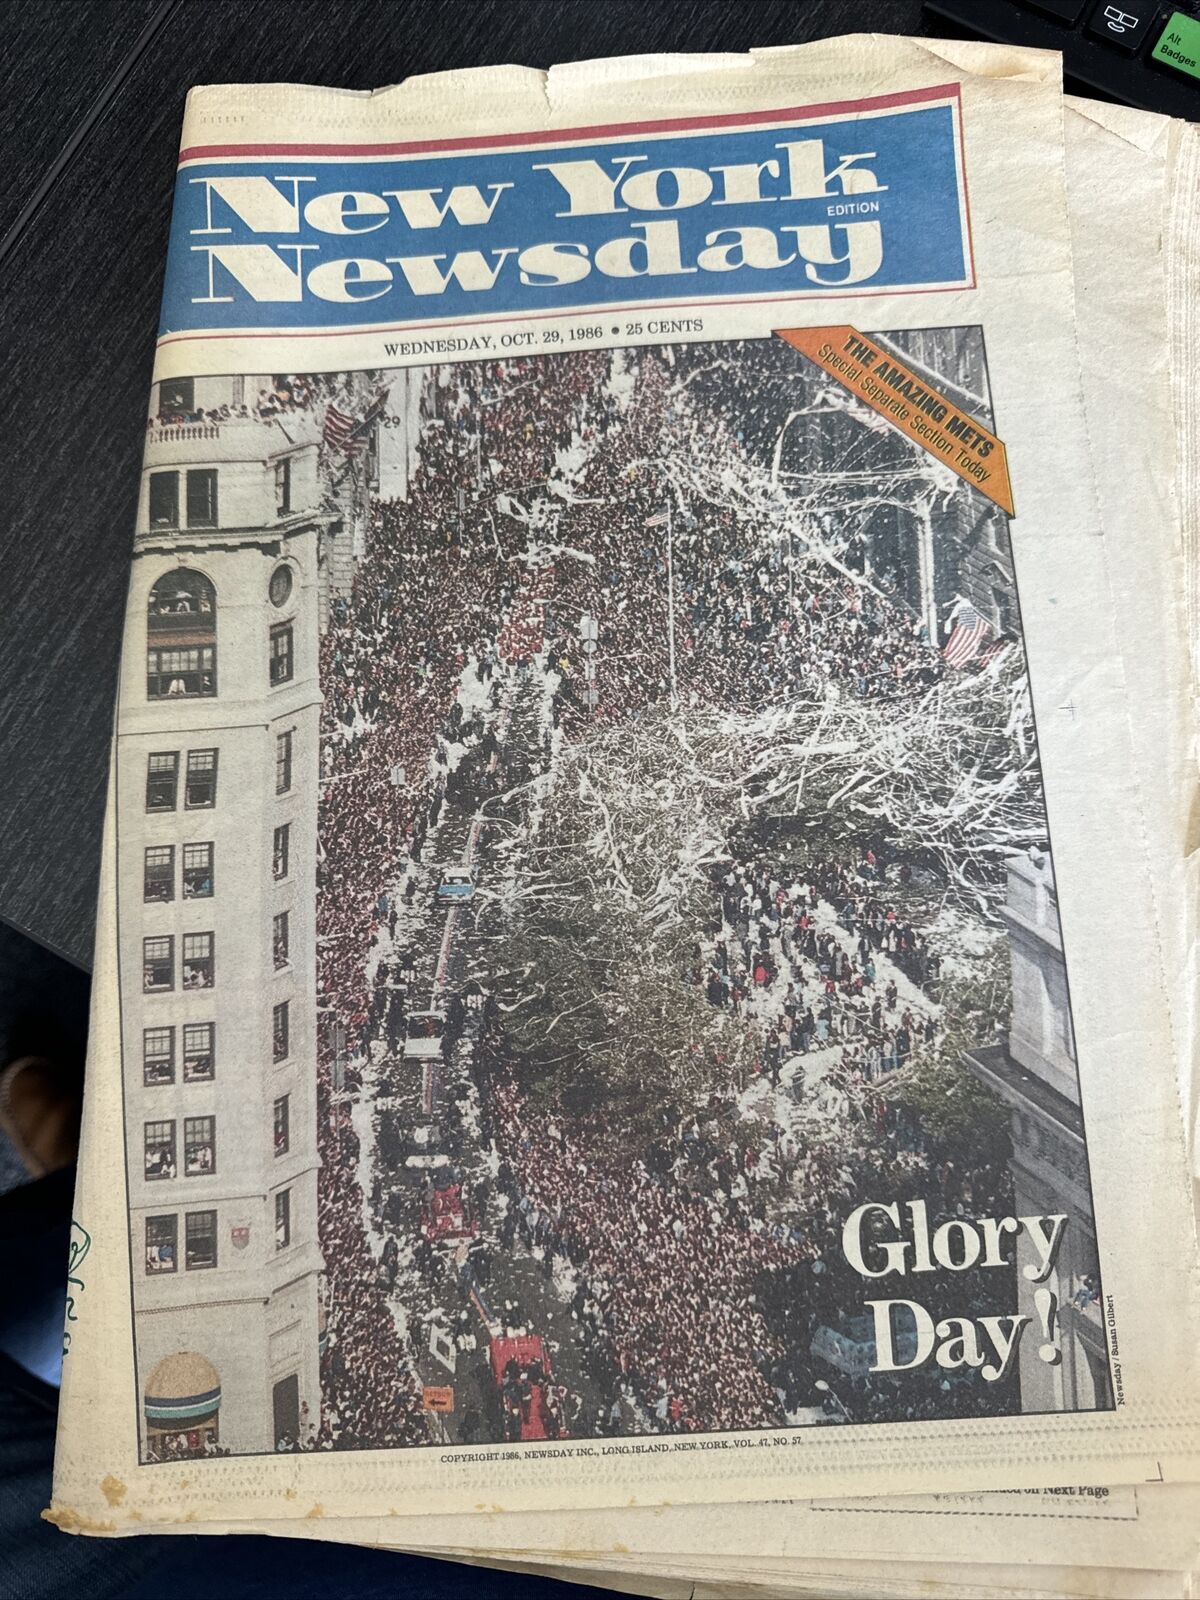 Newsday - October 29, 1986 - Mets Celebration in NYC